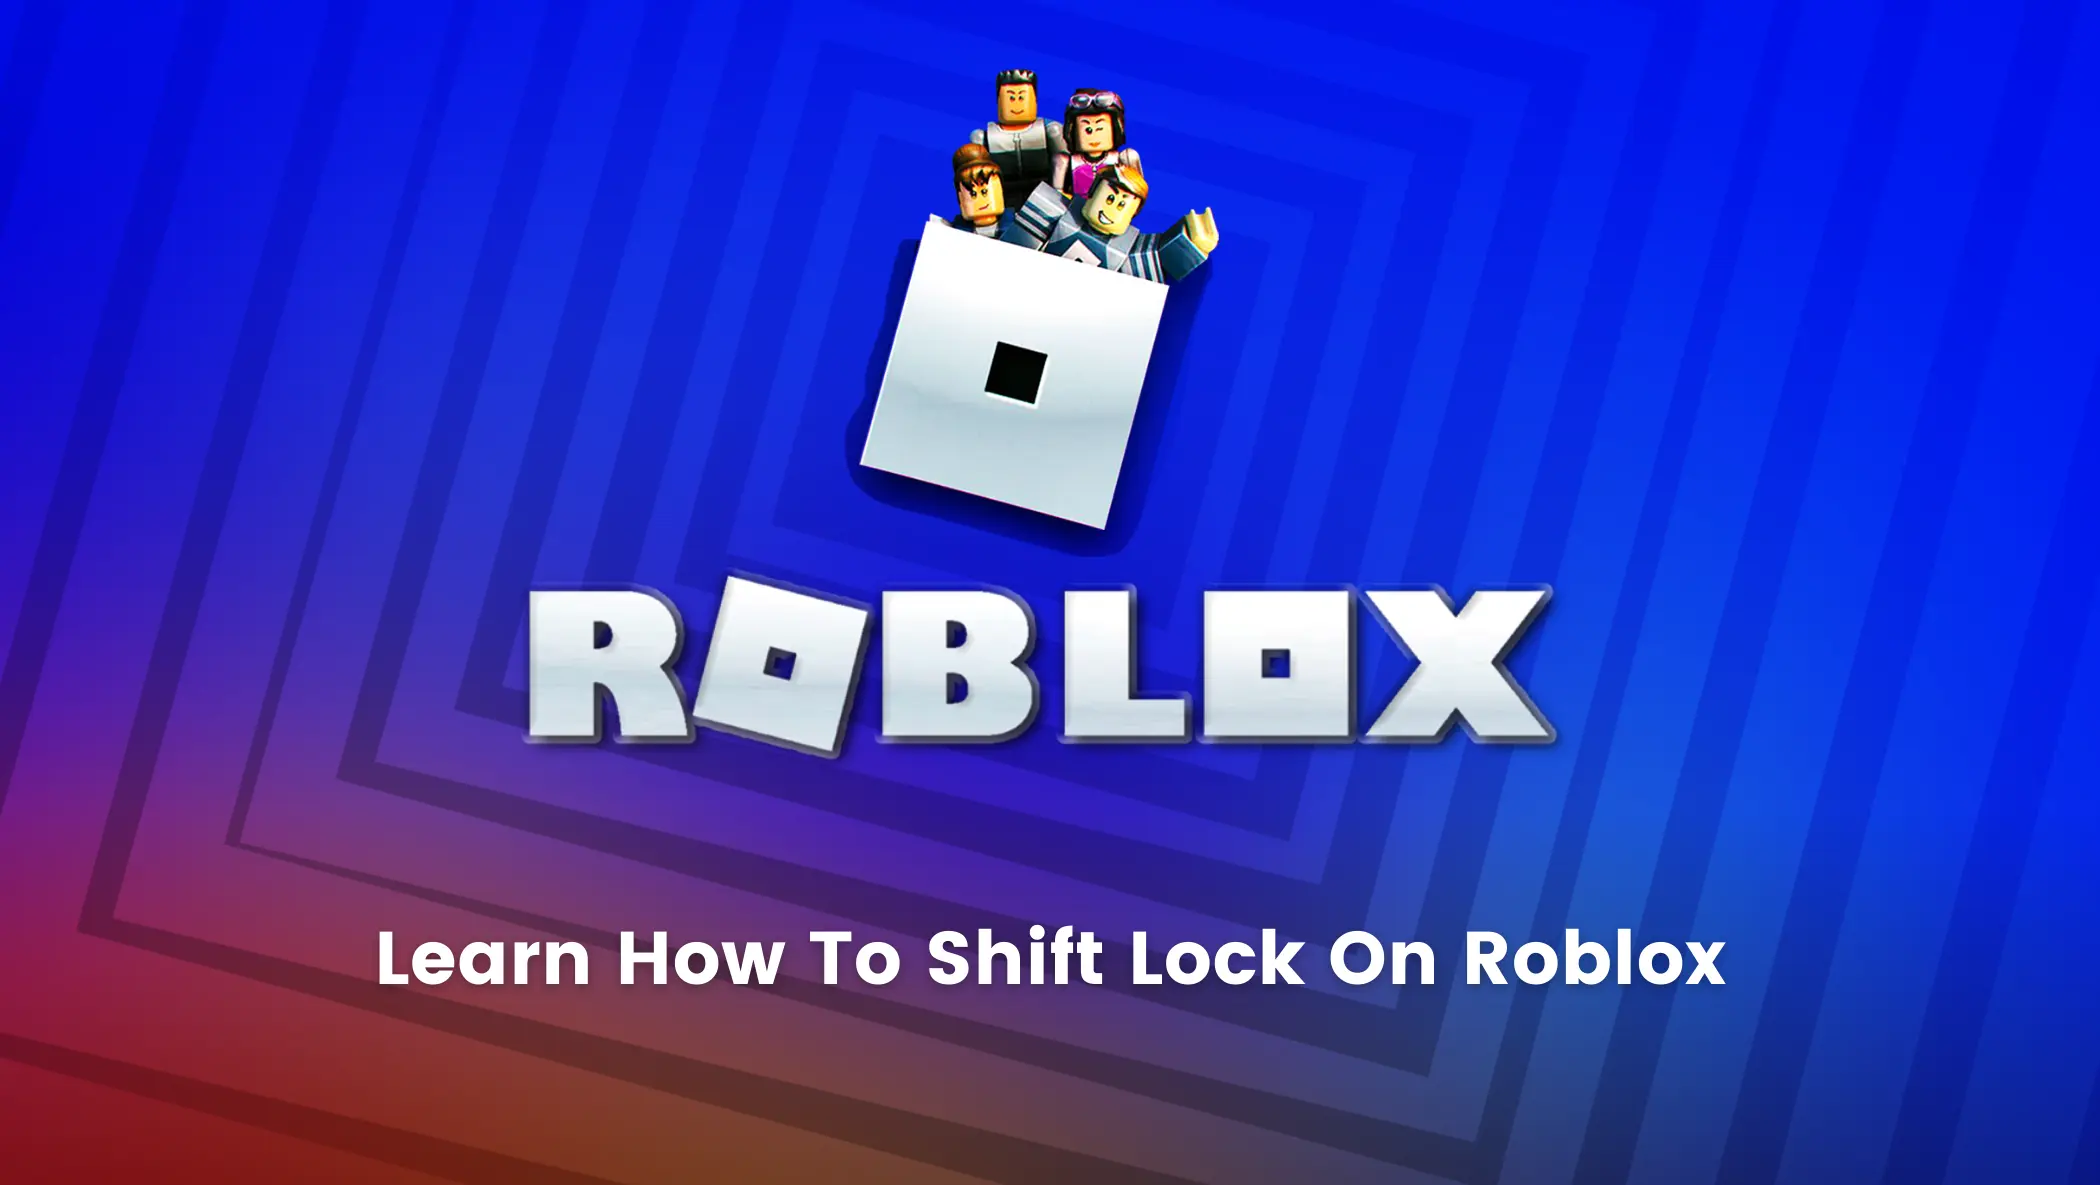 TUTORIAL How To Play Roblox Games + Some Computer Games Using A Keyboard  And Mouse On Mobile Device